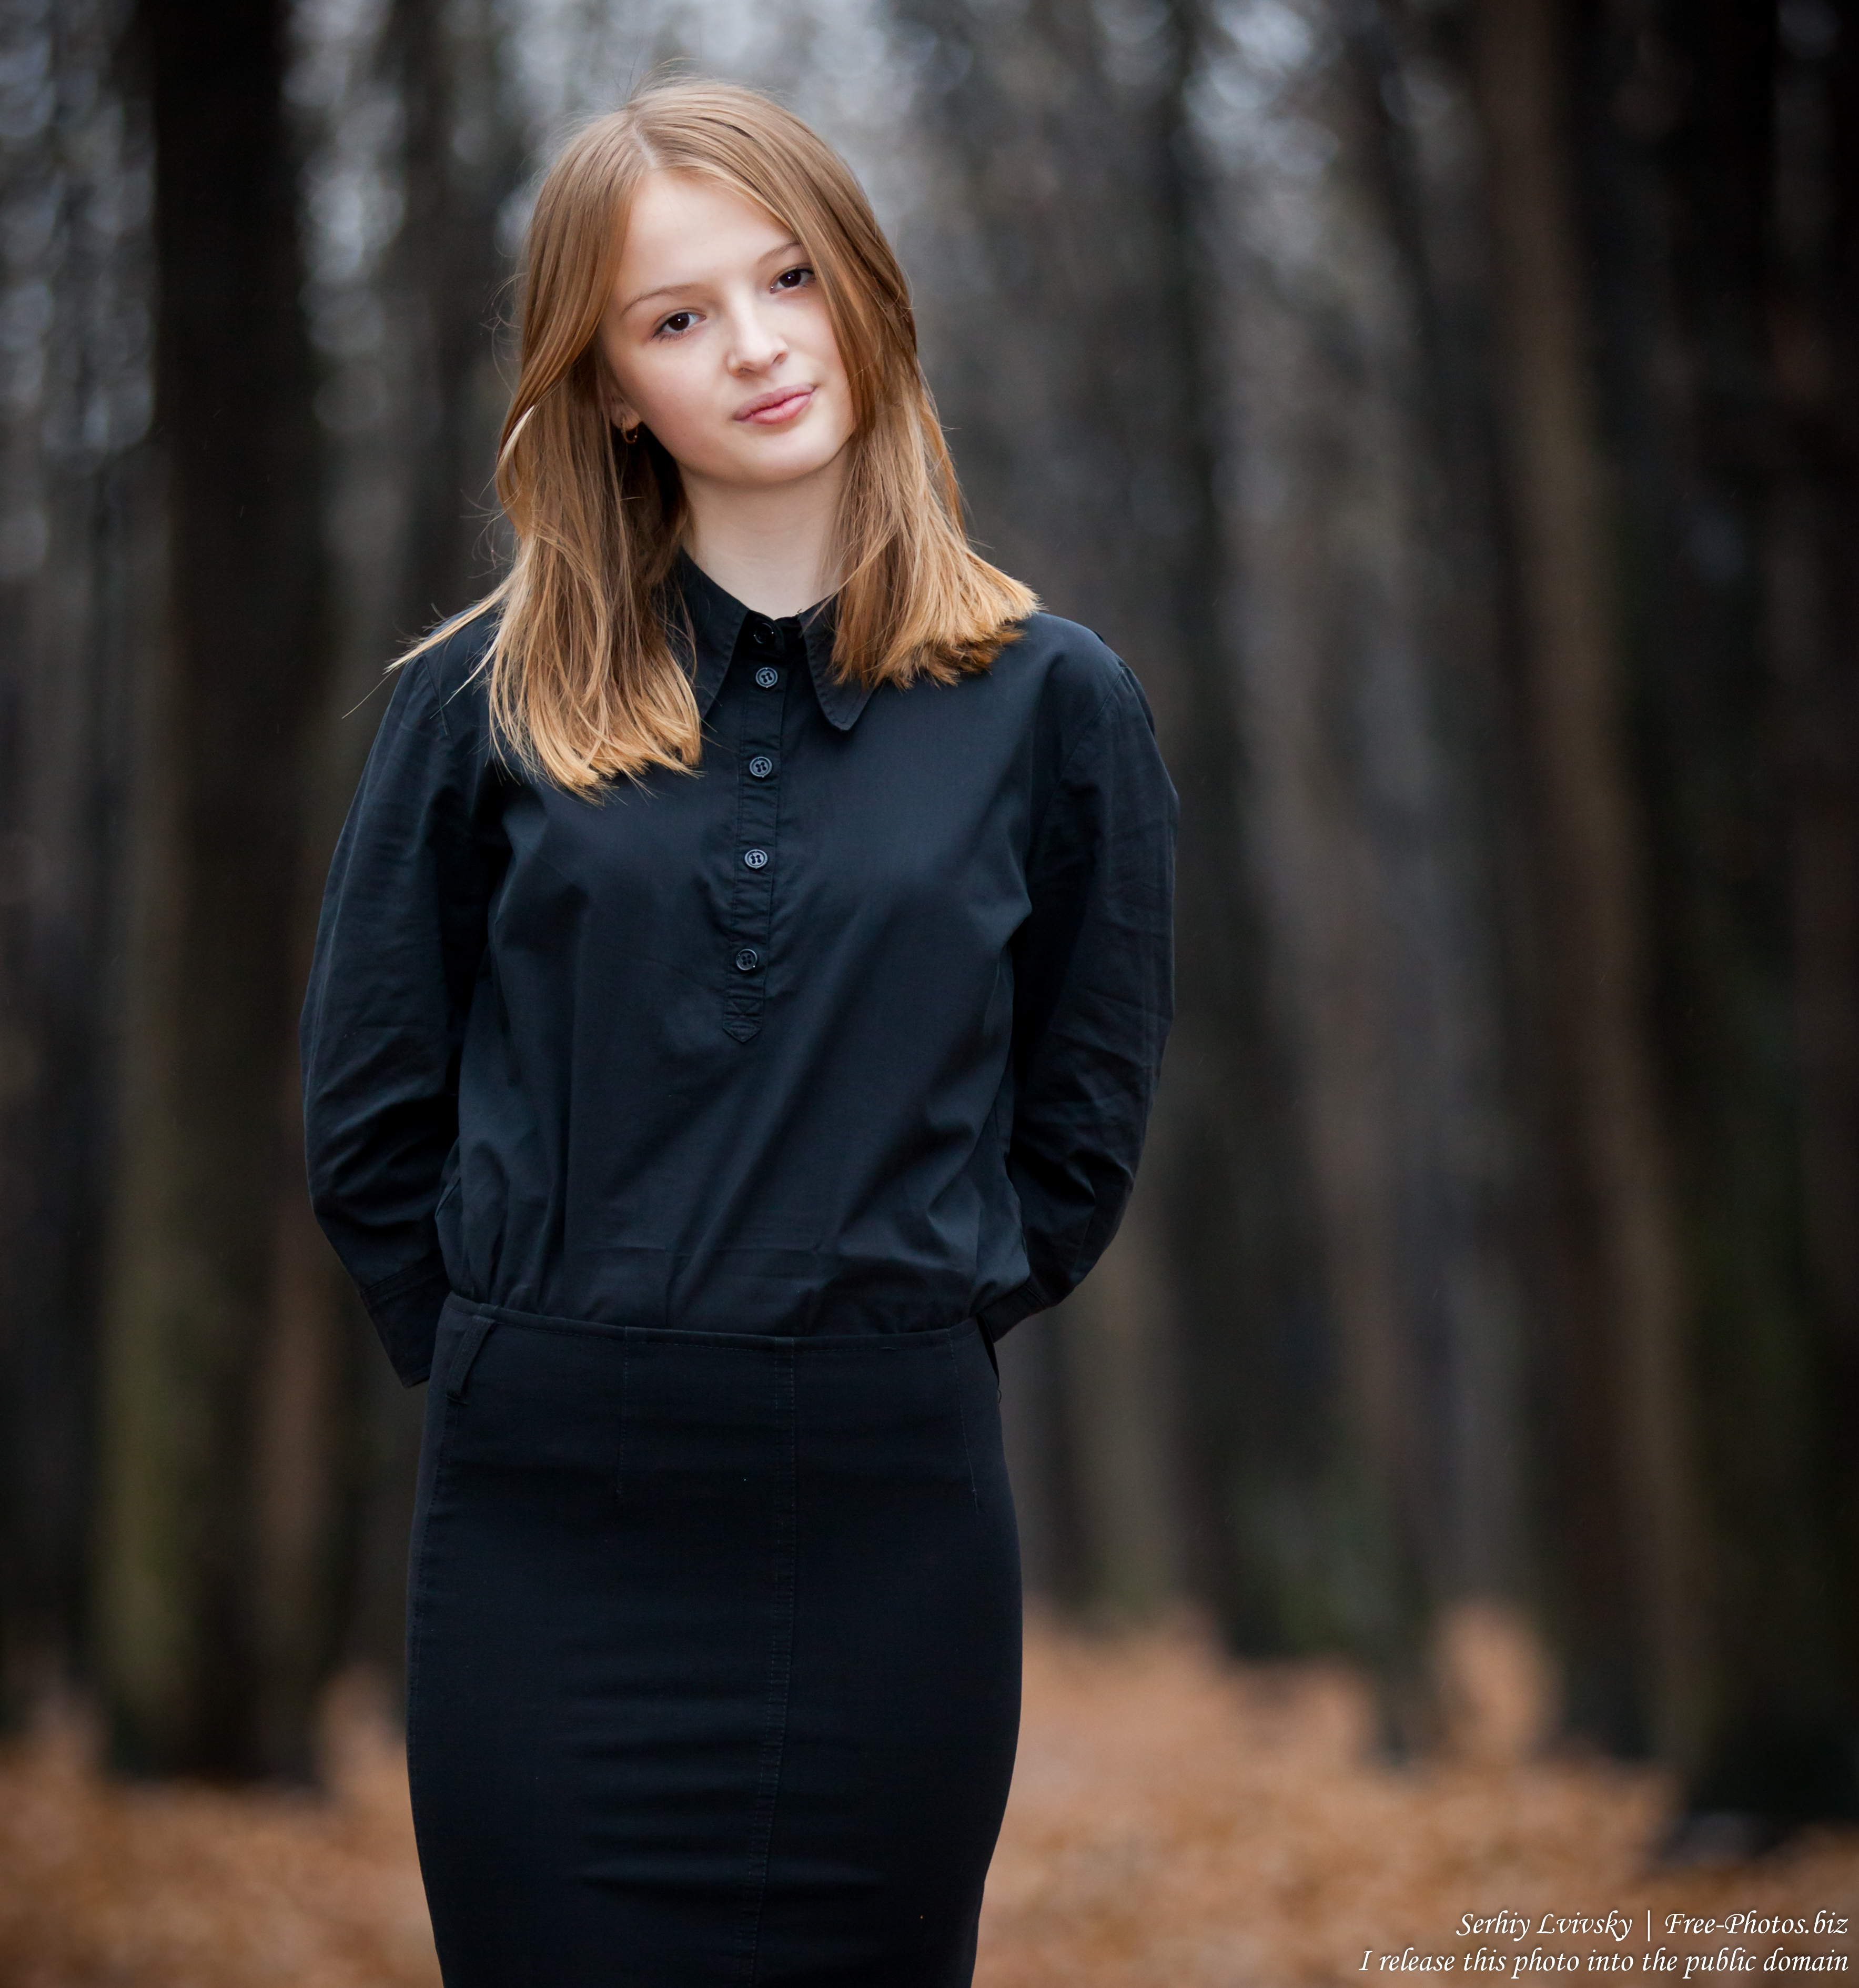 a 13-year-old Catholic girl photographed by Serhiy Lvivsky in November 2015, picture 5